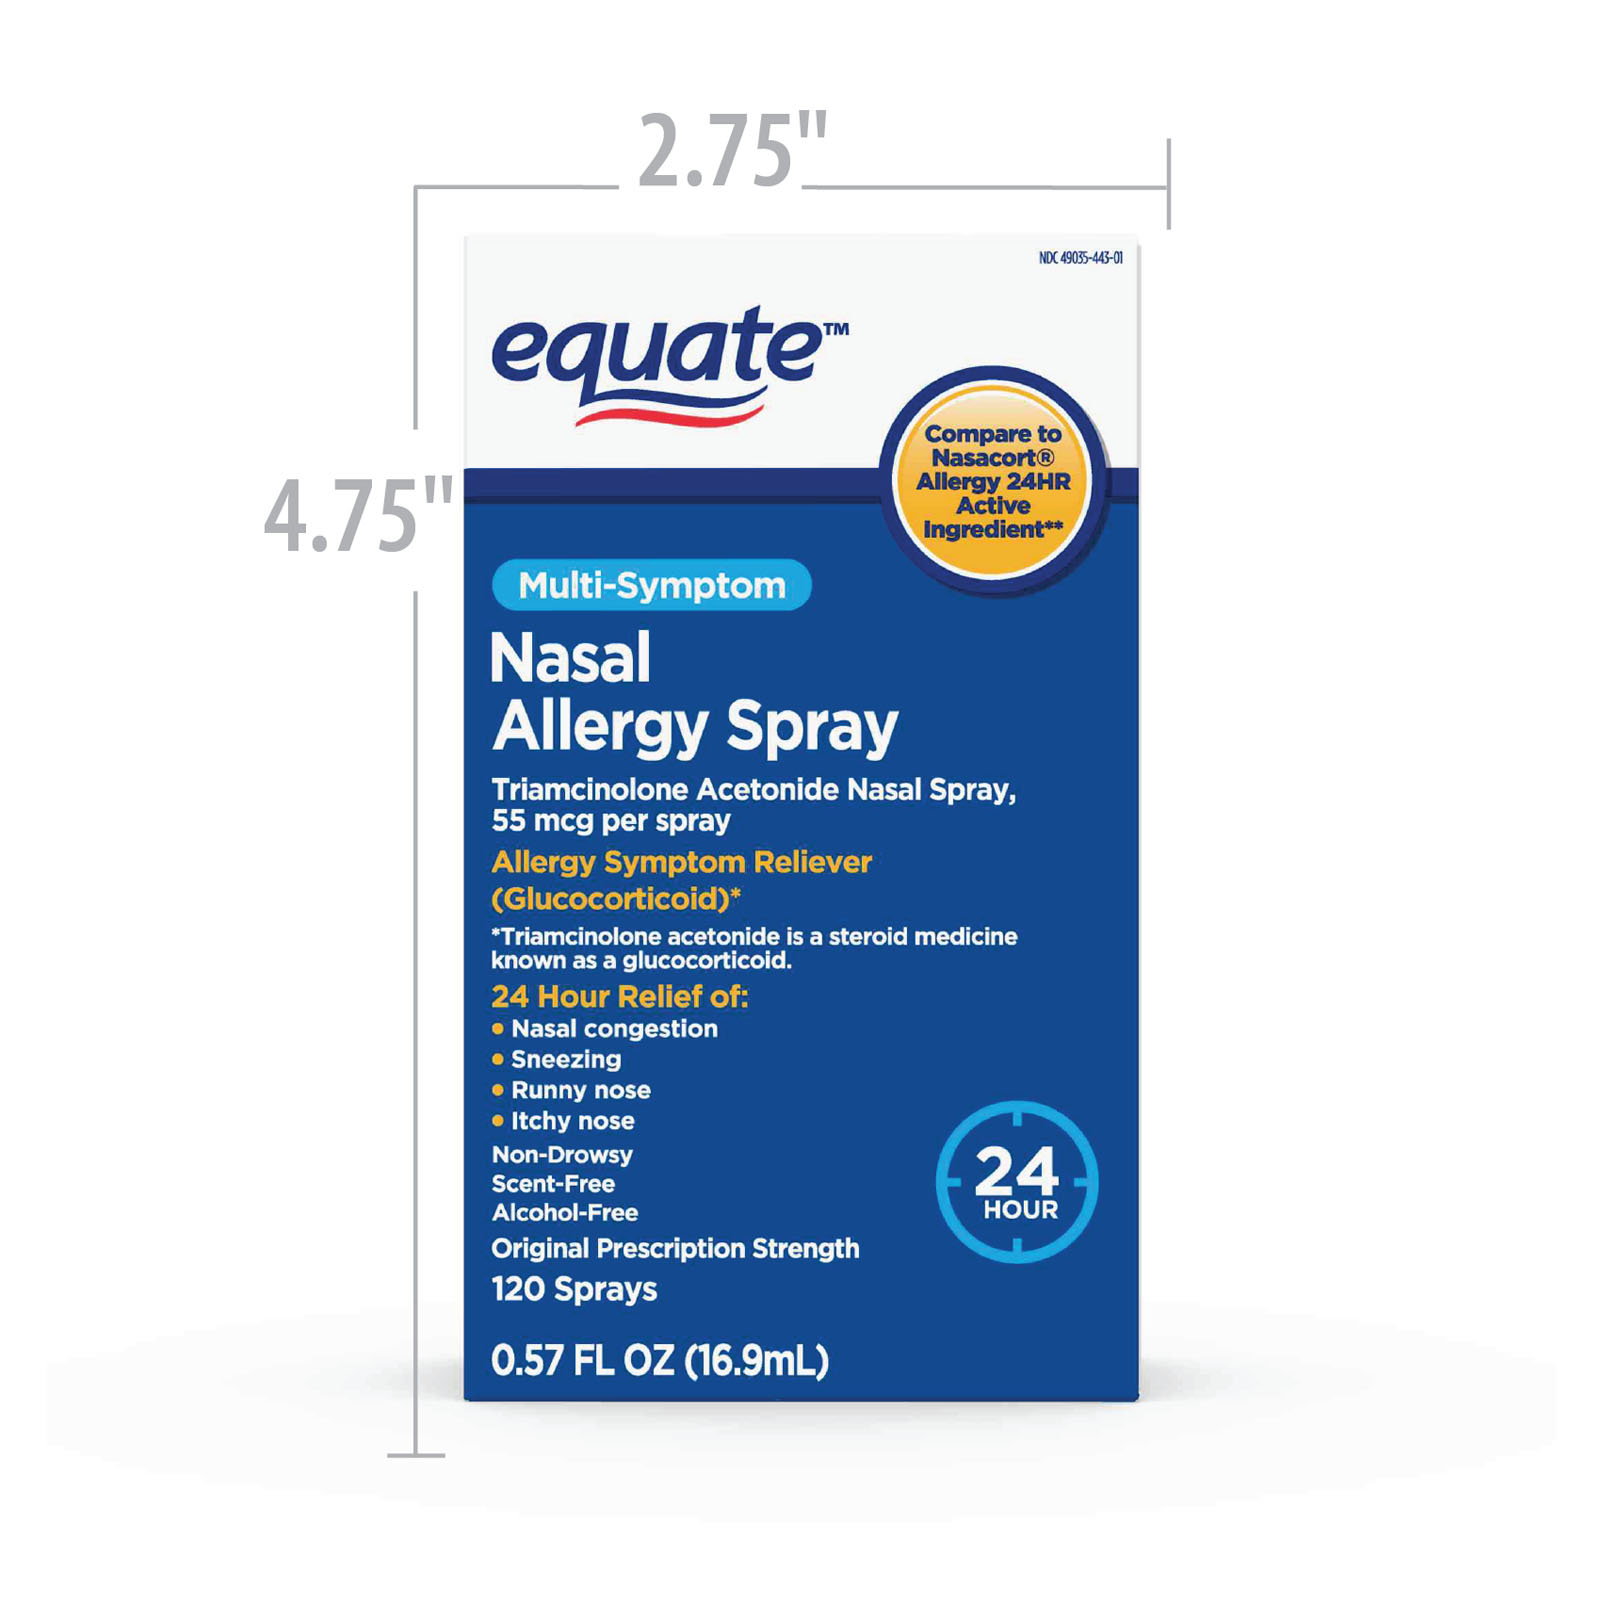 nasal spray for adults